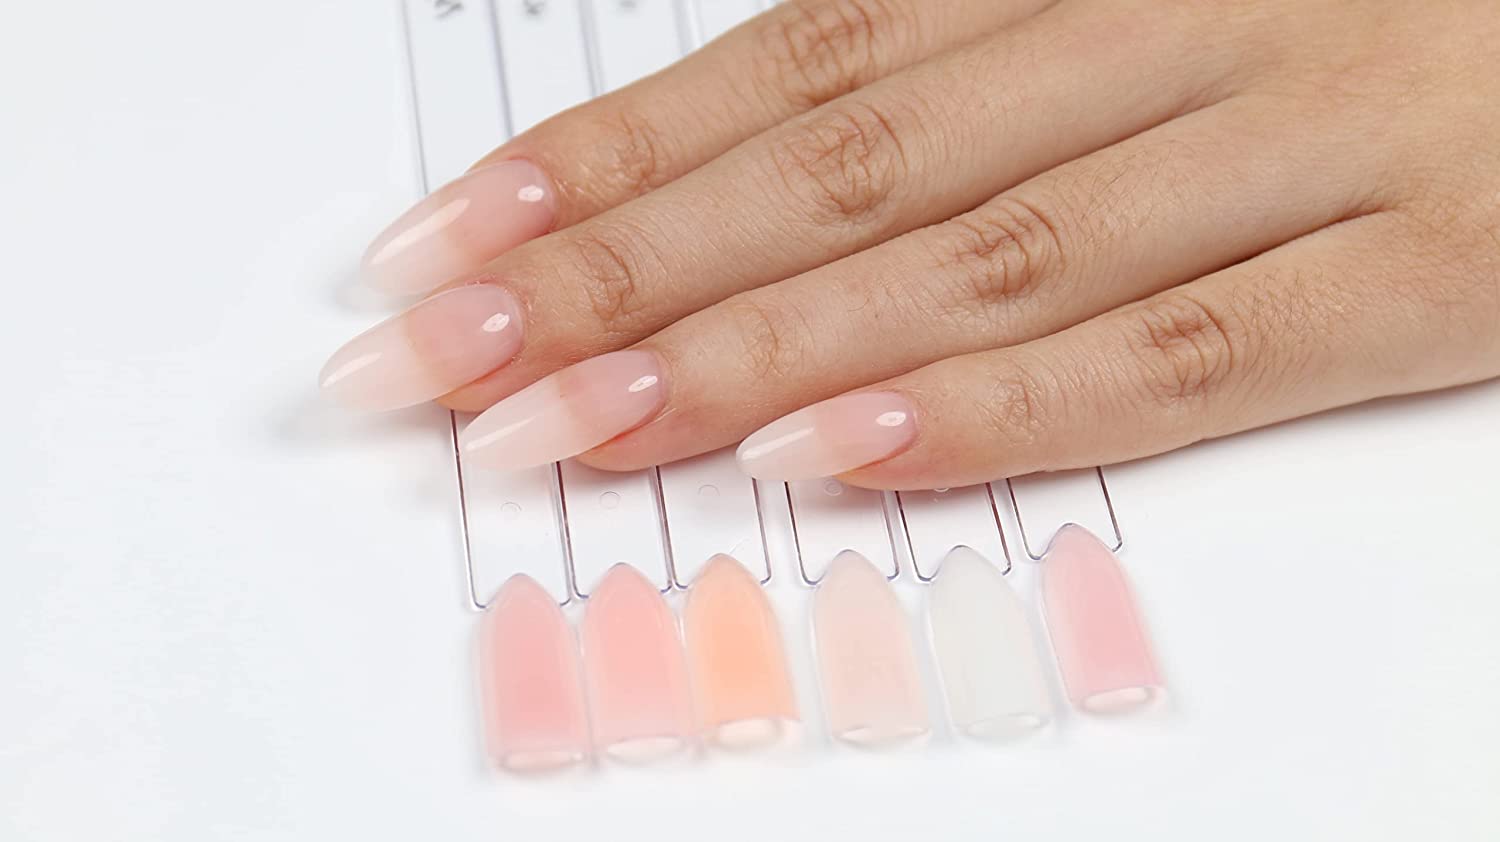 Everything You Need To Know About Builder Gel For Nails